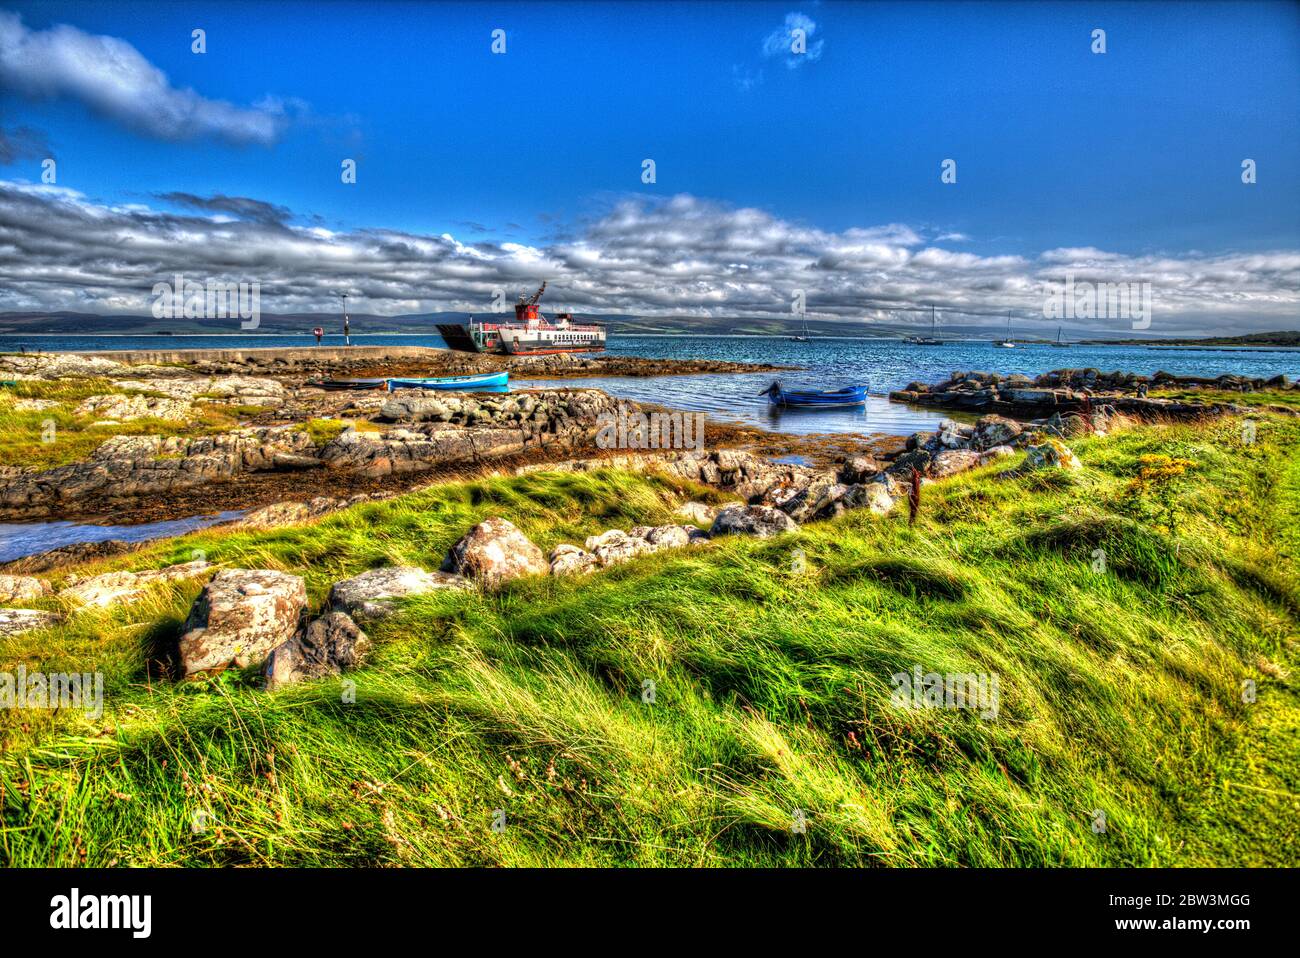 Isle of Gigha, Scotland. Artistic view of the CalMac ferry MV Loch Ranza arriving at Ardminish jetty, on the Isle of Gigha. Stock Photo